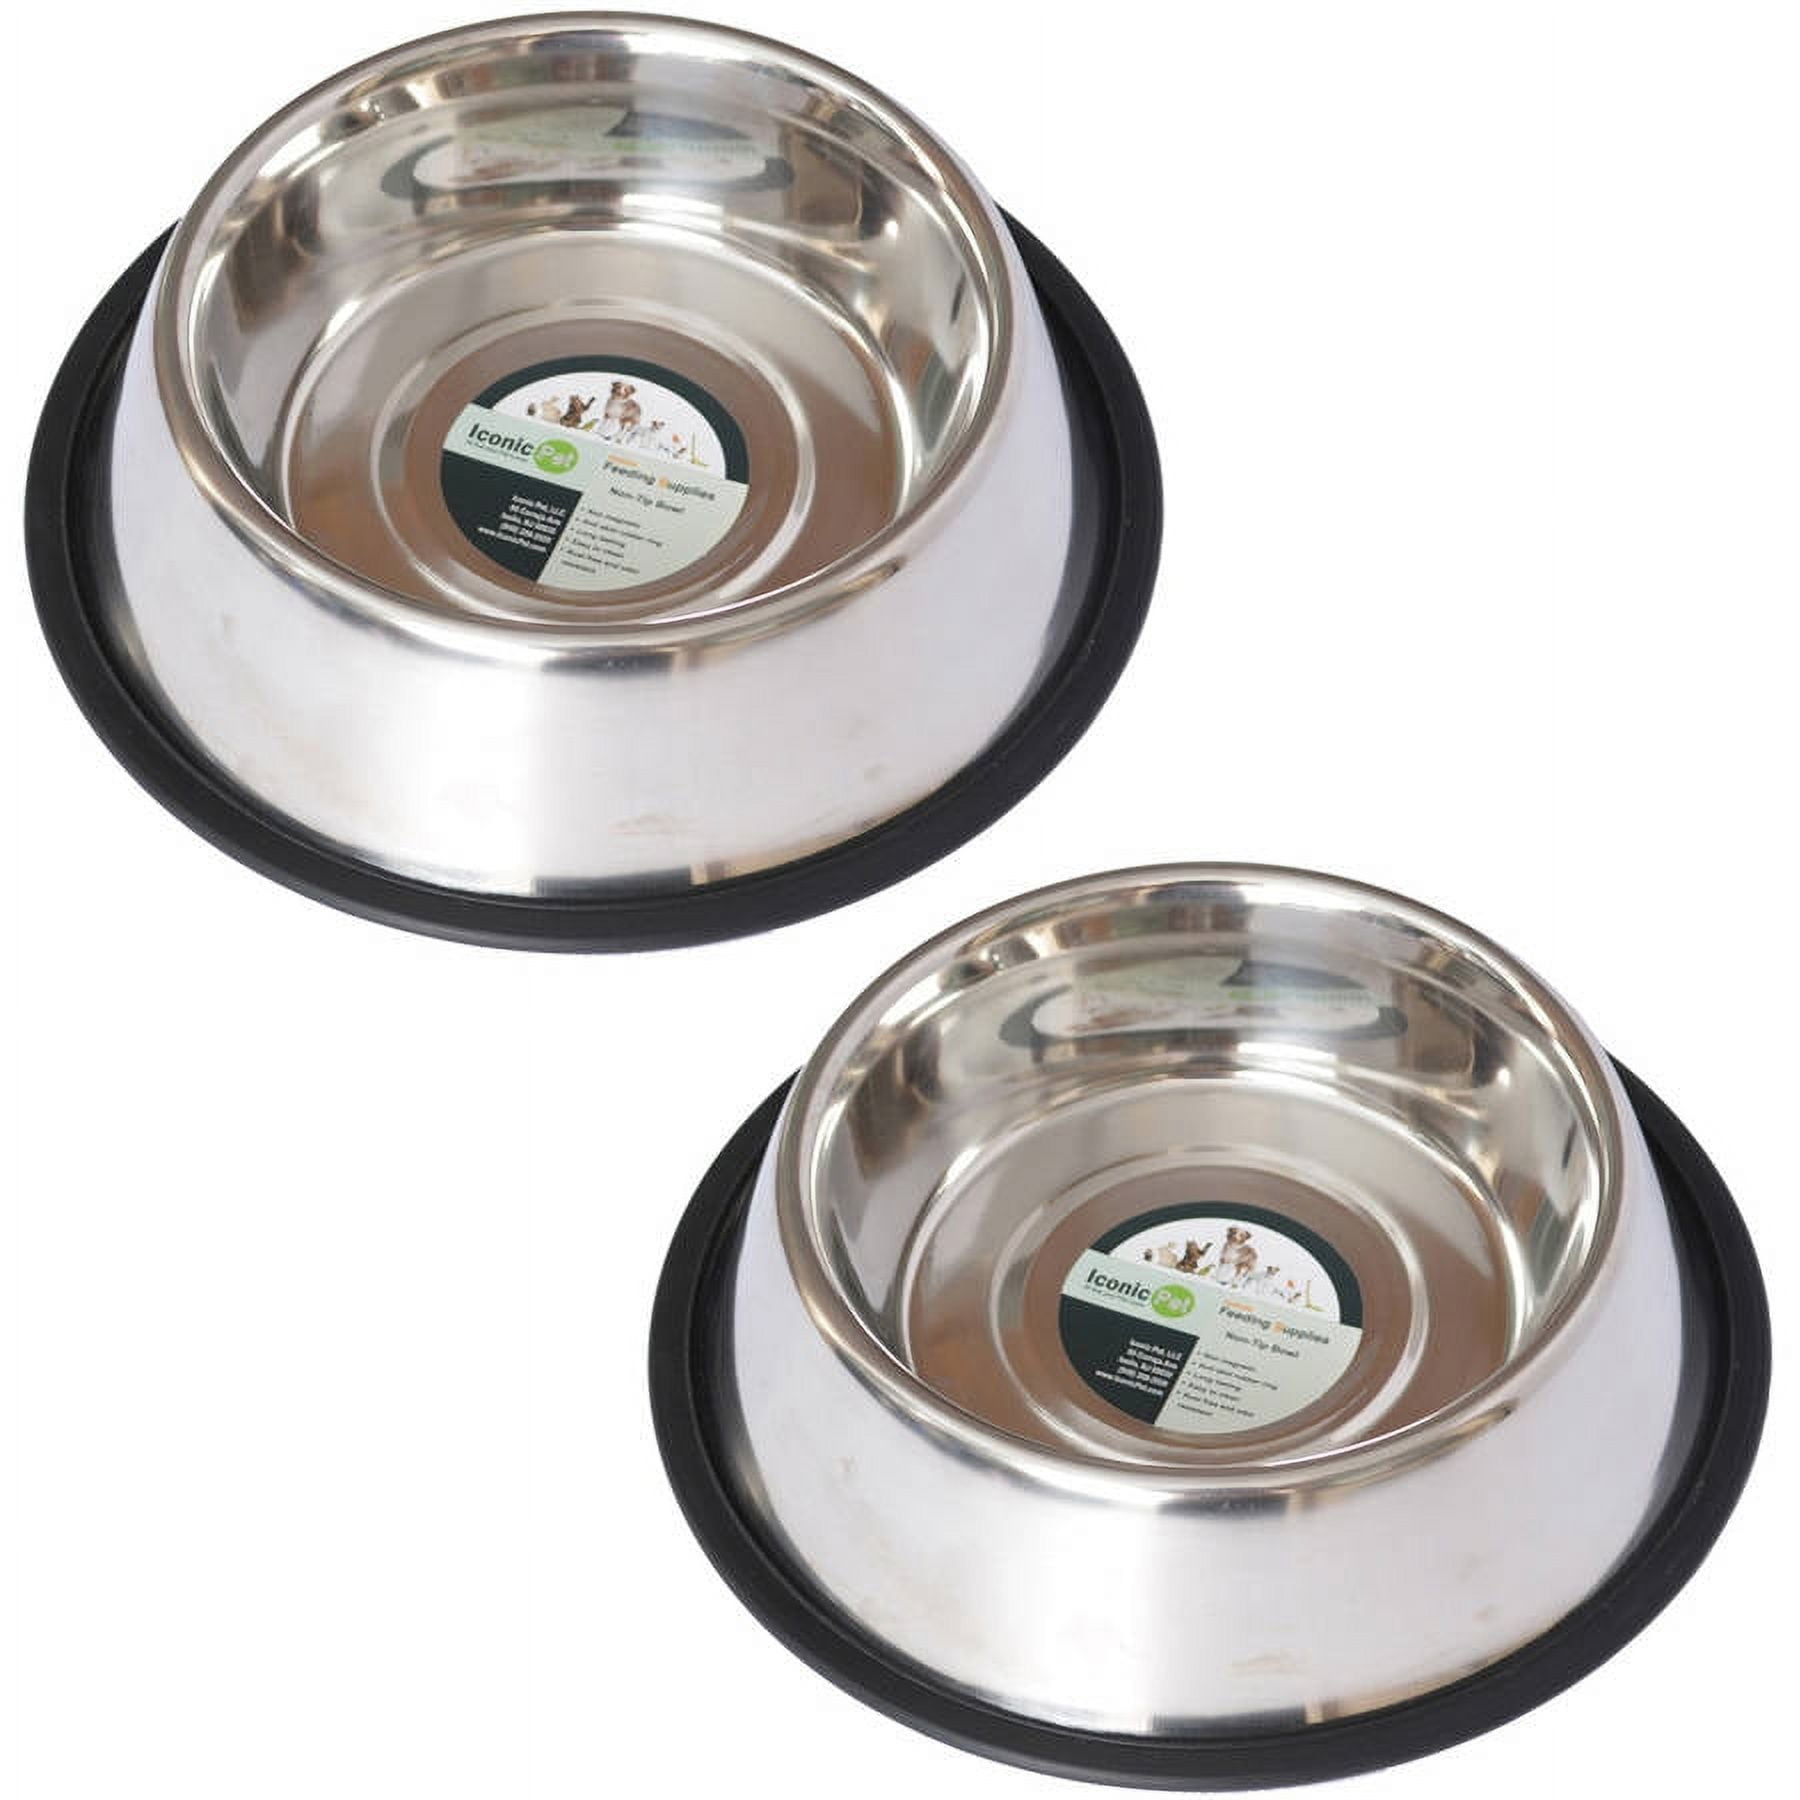 8 Oz Stainless Steel Non-skid Pet Bowl For Dog Or Cat - Pack Of 2